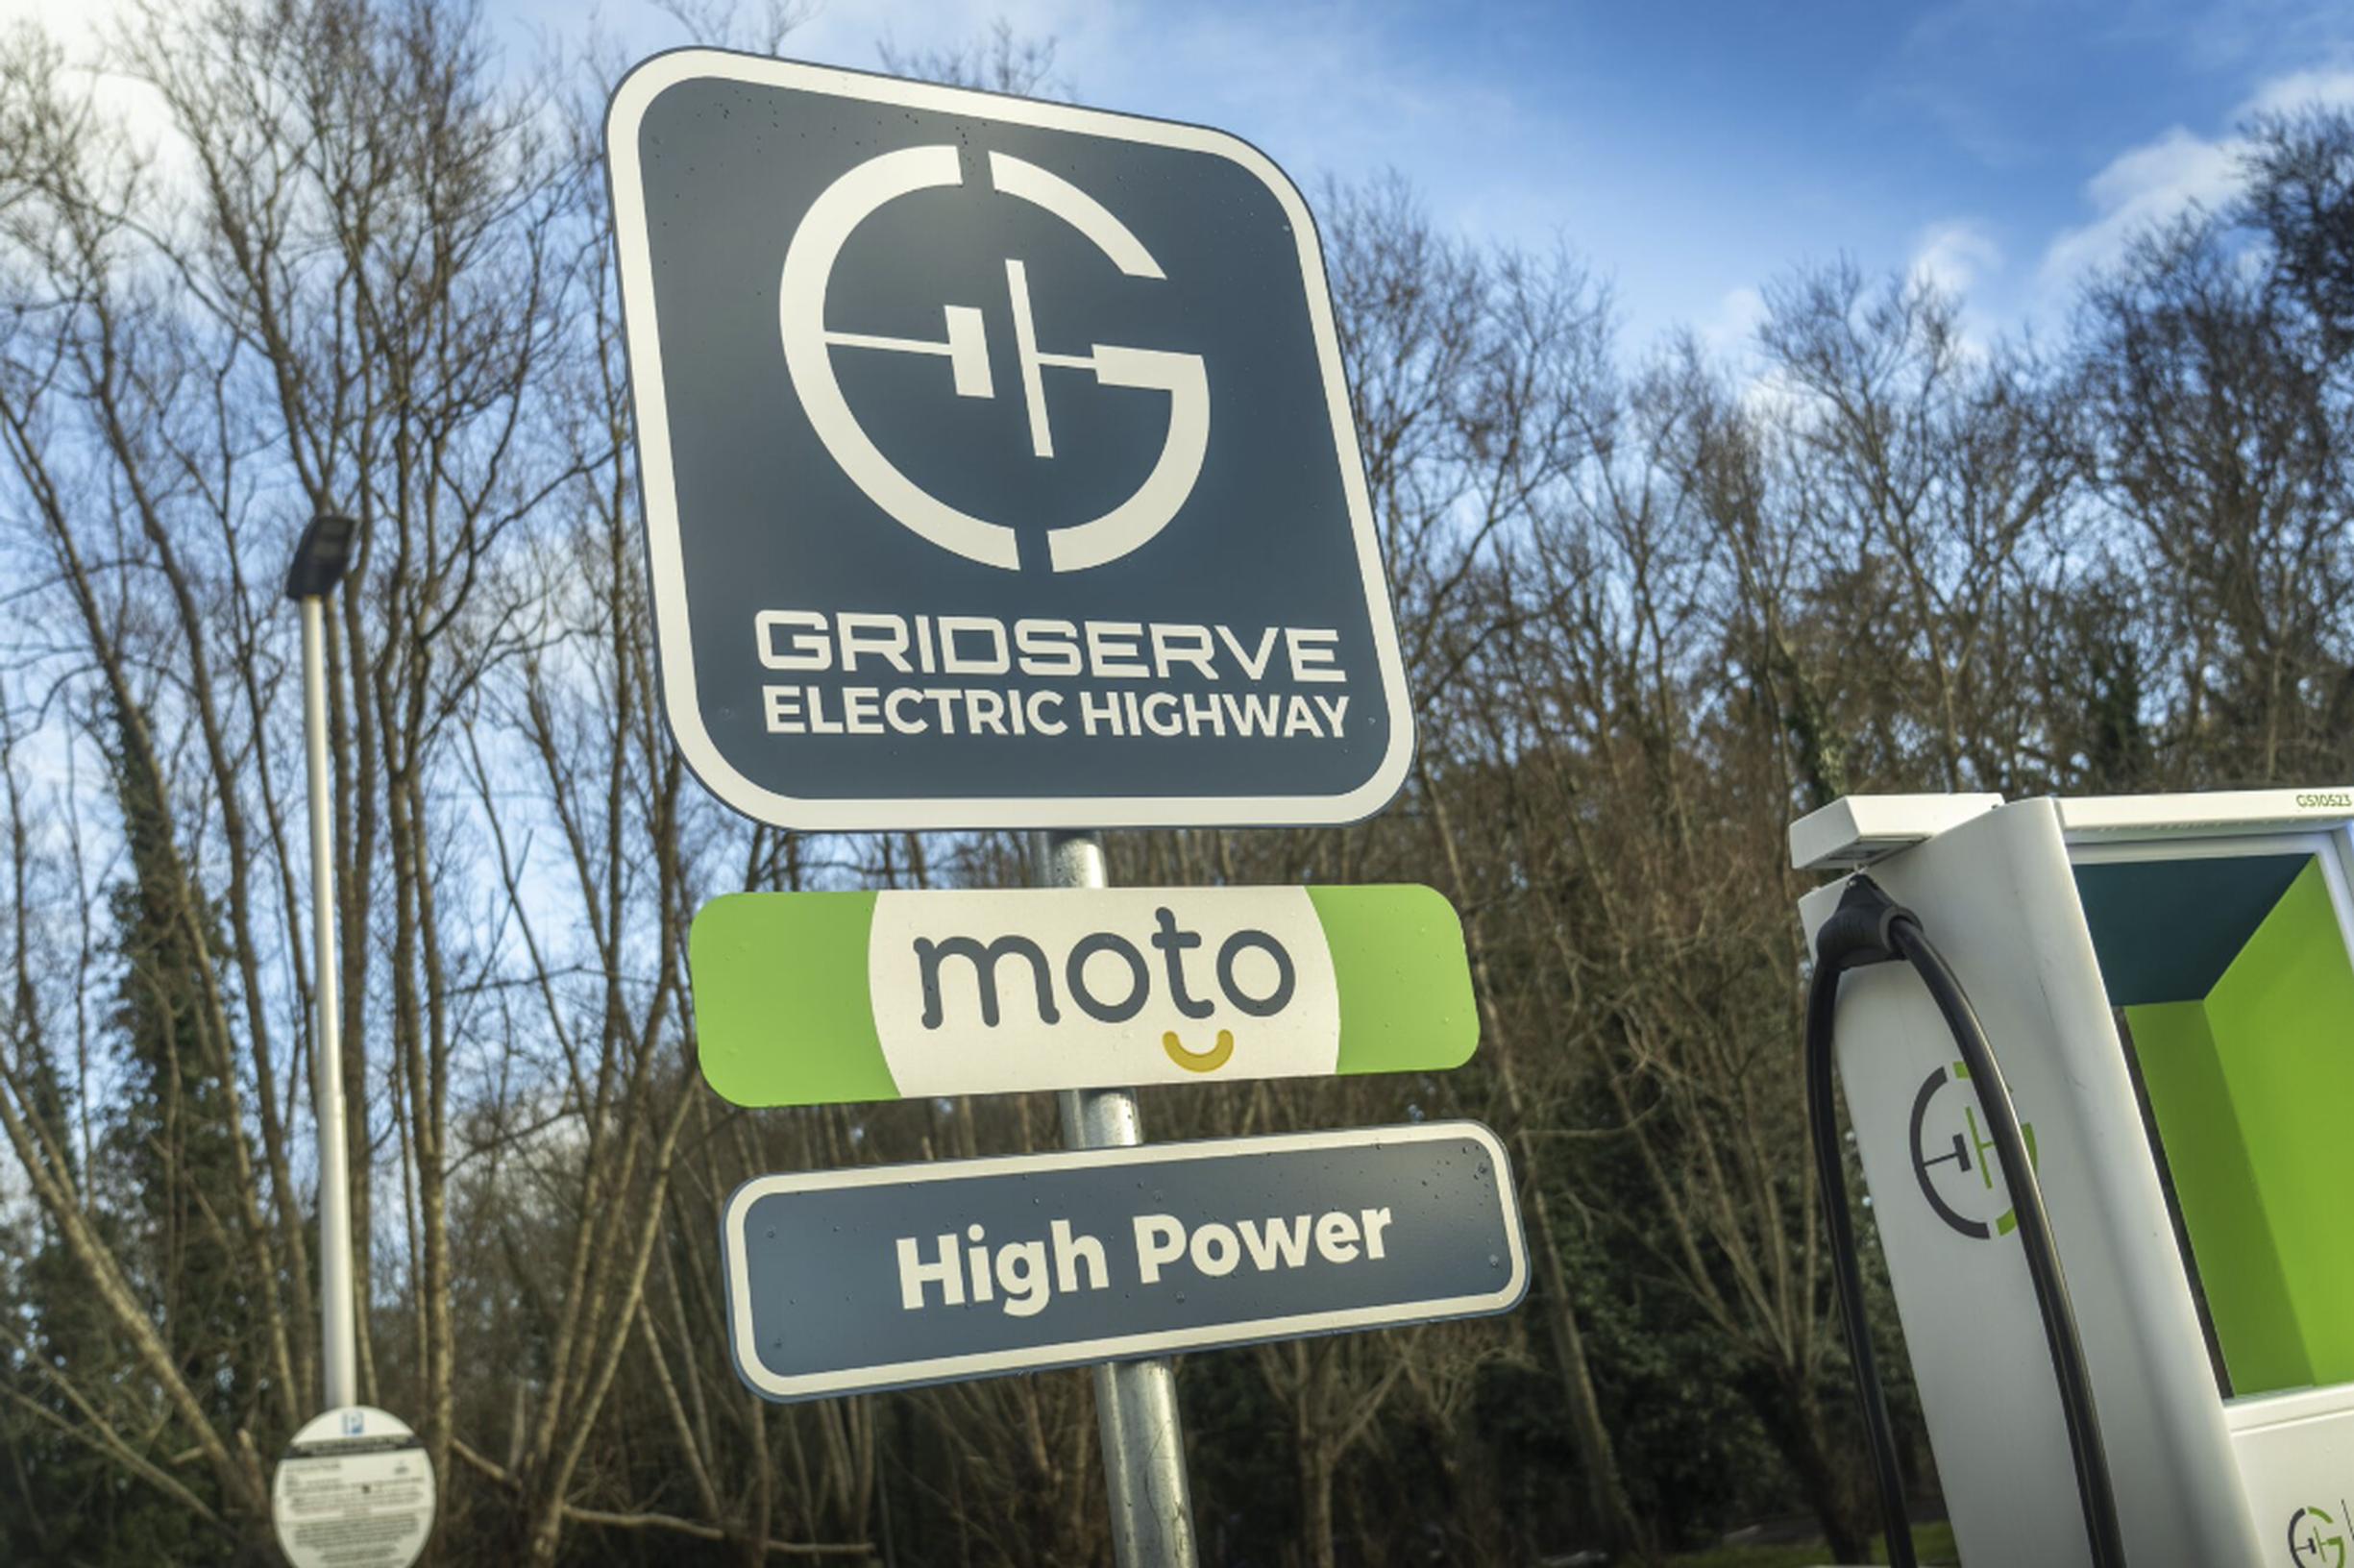 Gridserve and Moto have opened new Electric Super Hubs at Moto Washington North and South on the A1(M)